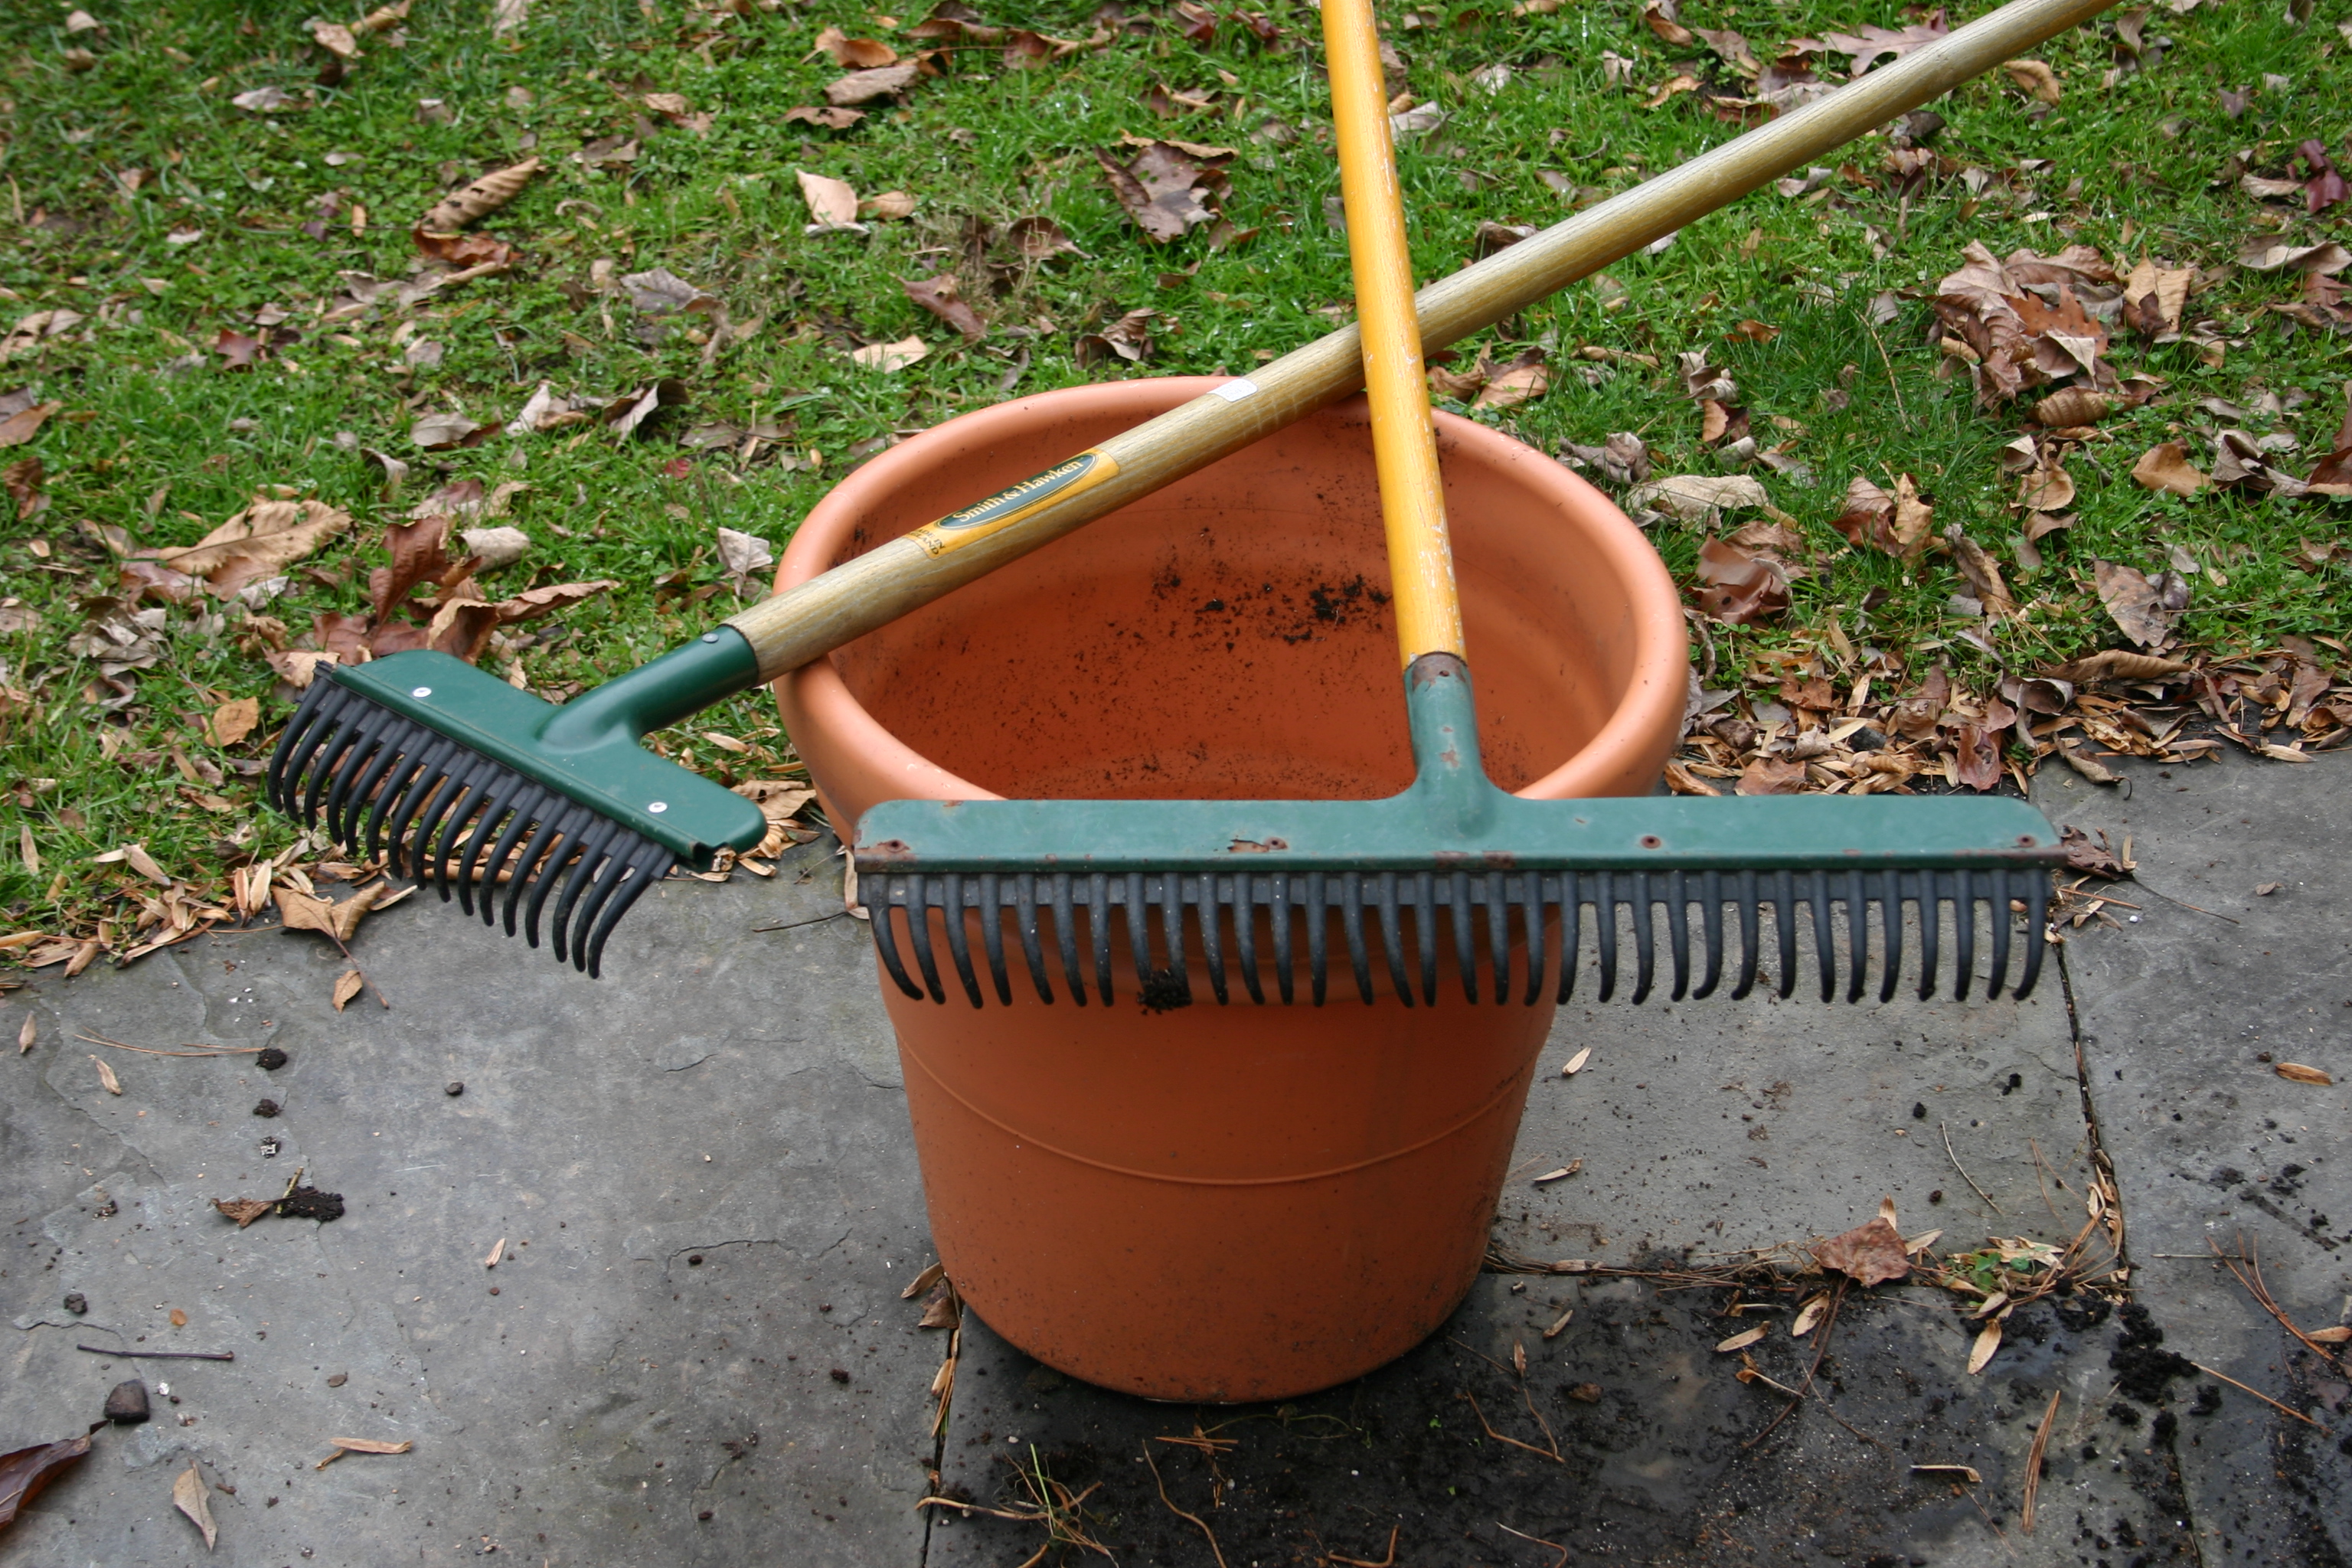 Two garden rakes on top of a plastic tub